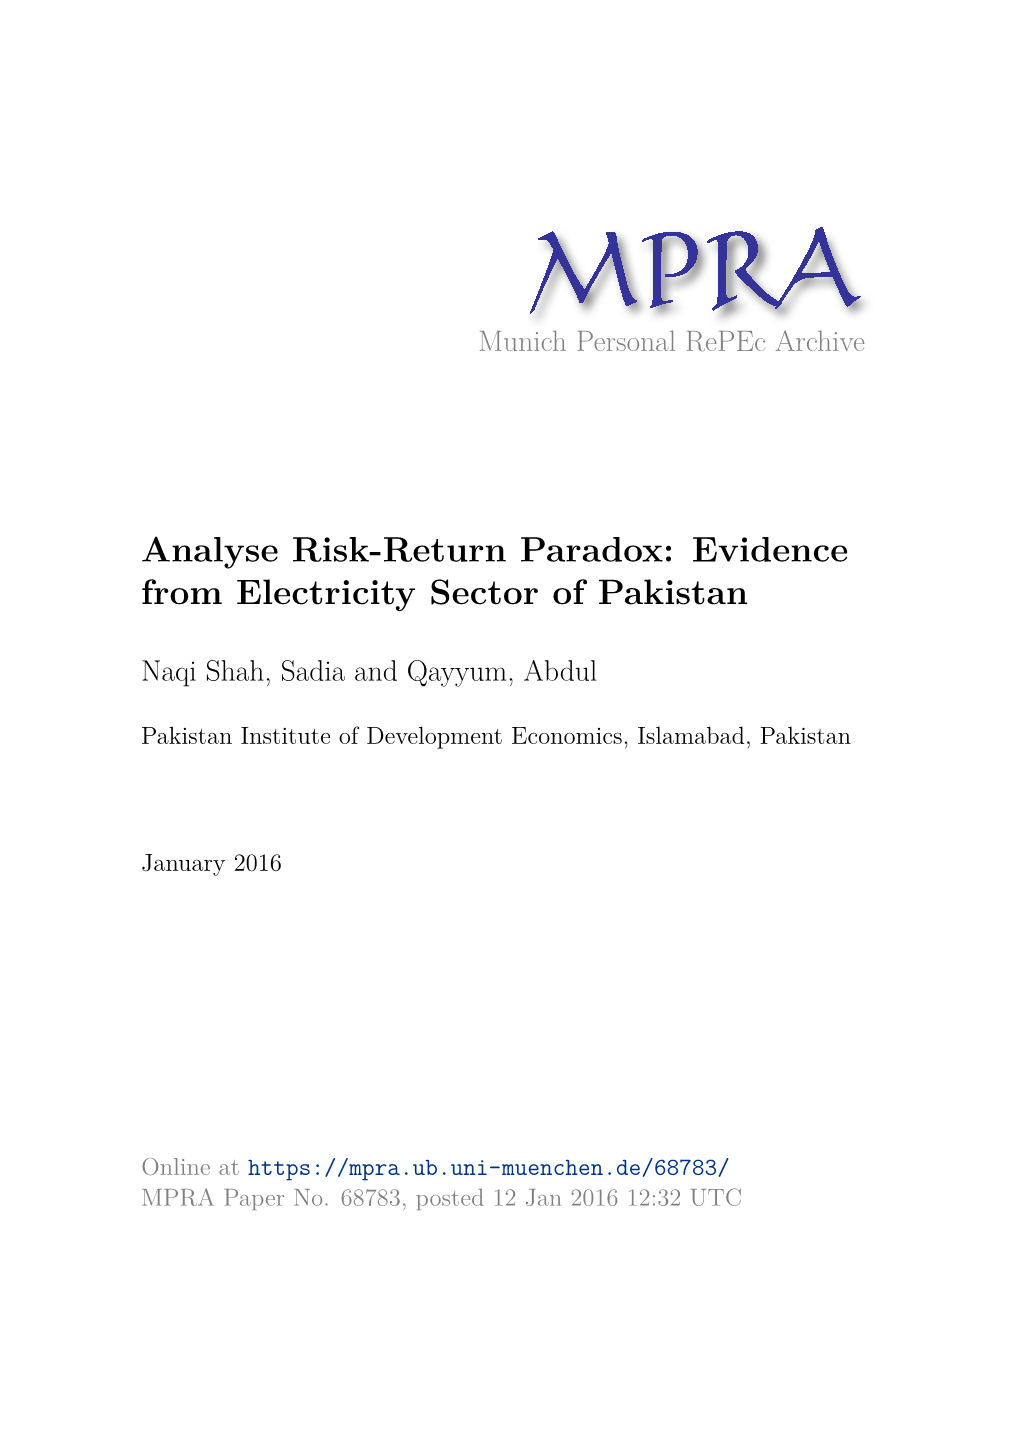 Analyse Risk-Return Paradox: Evidence from Electricity Sector of Pakistan